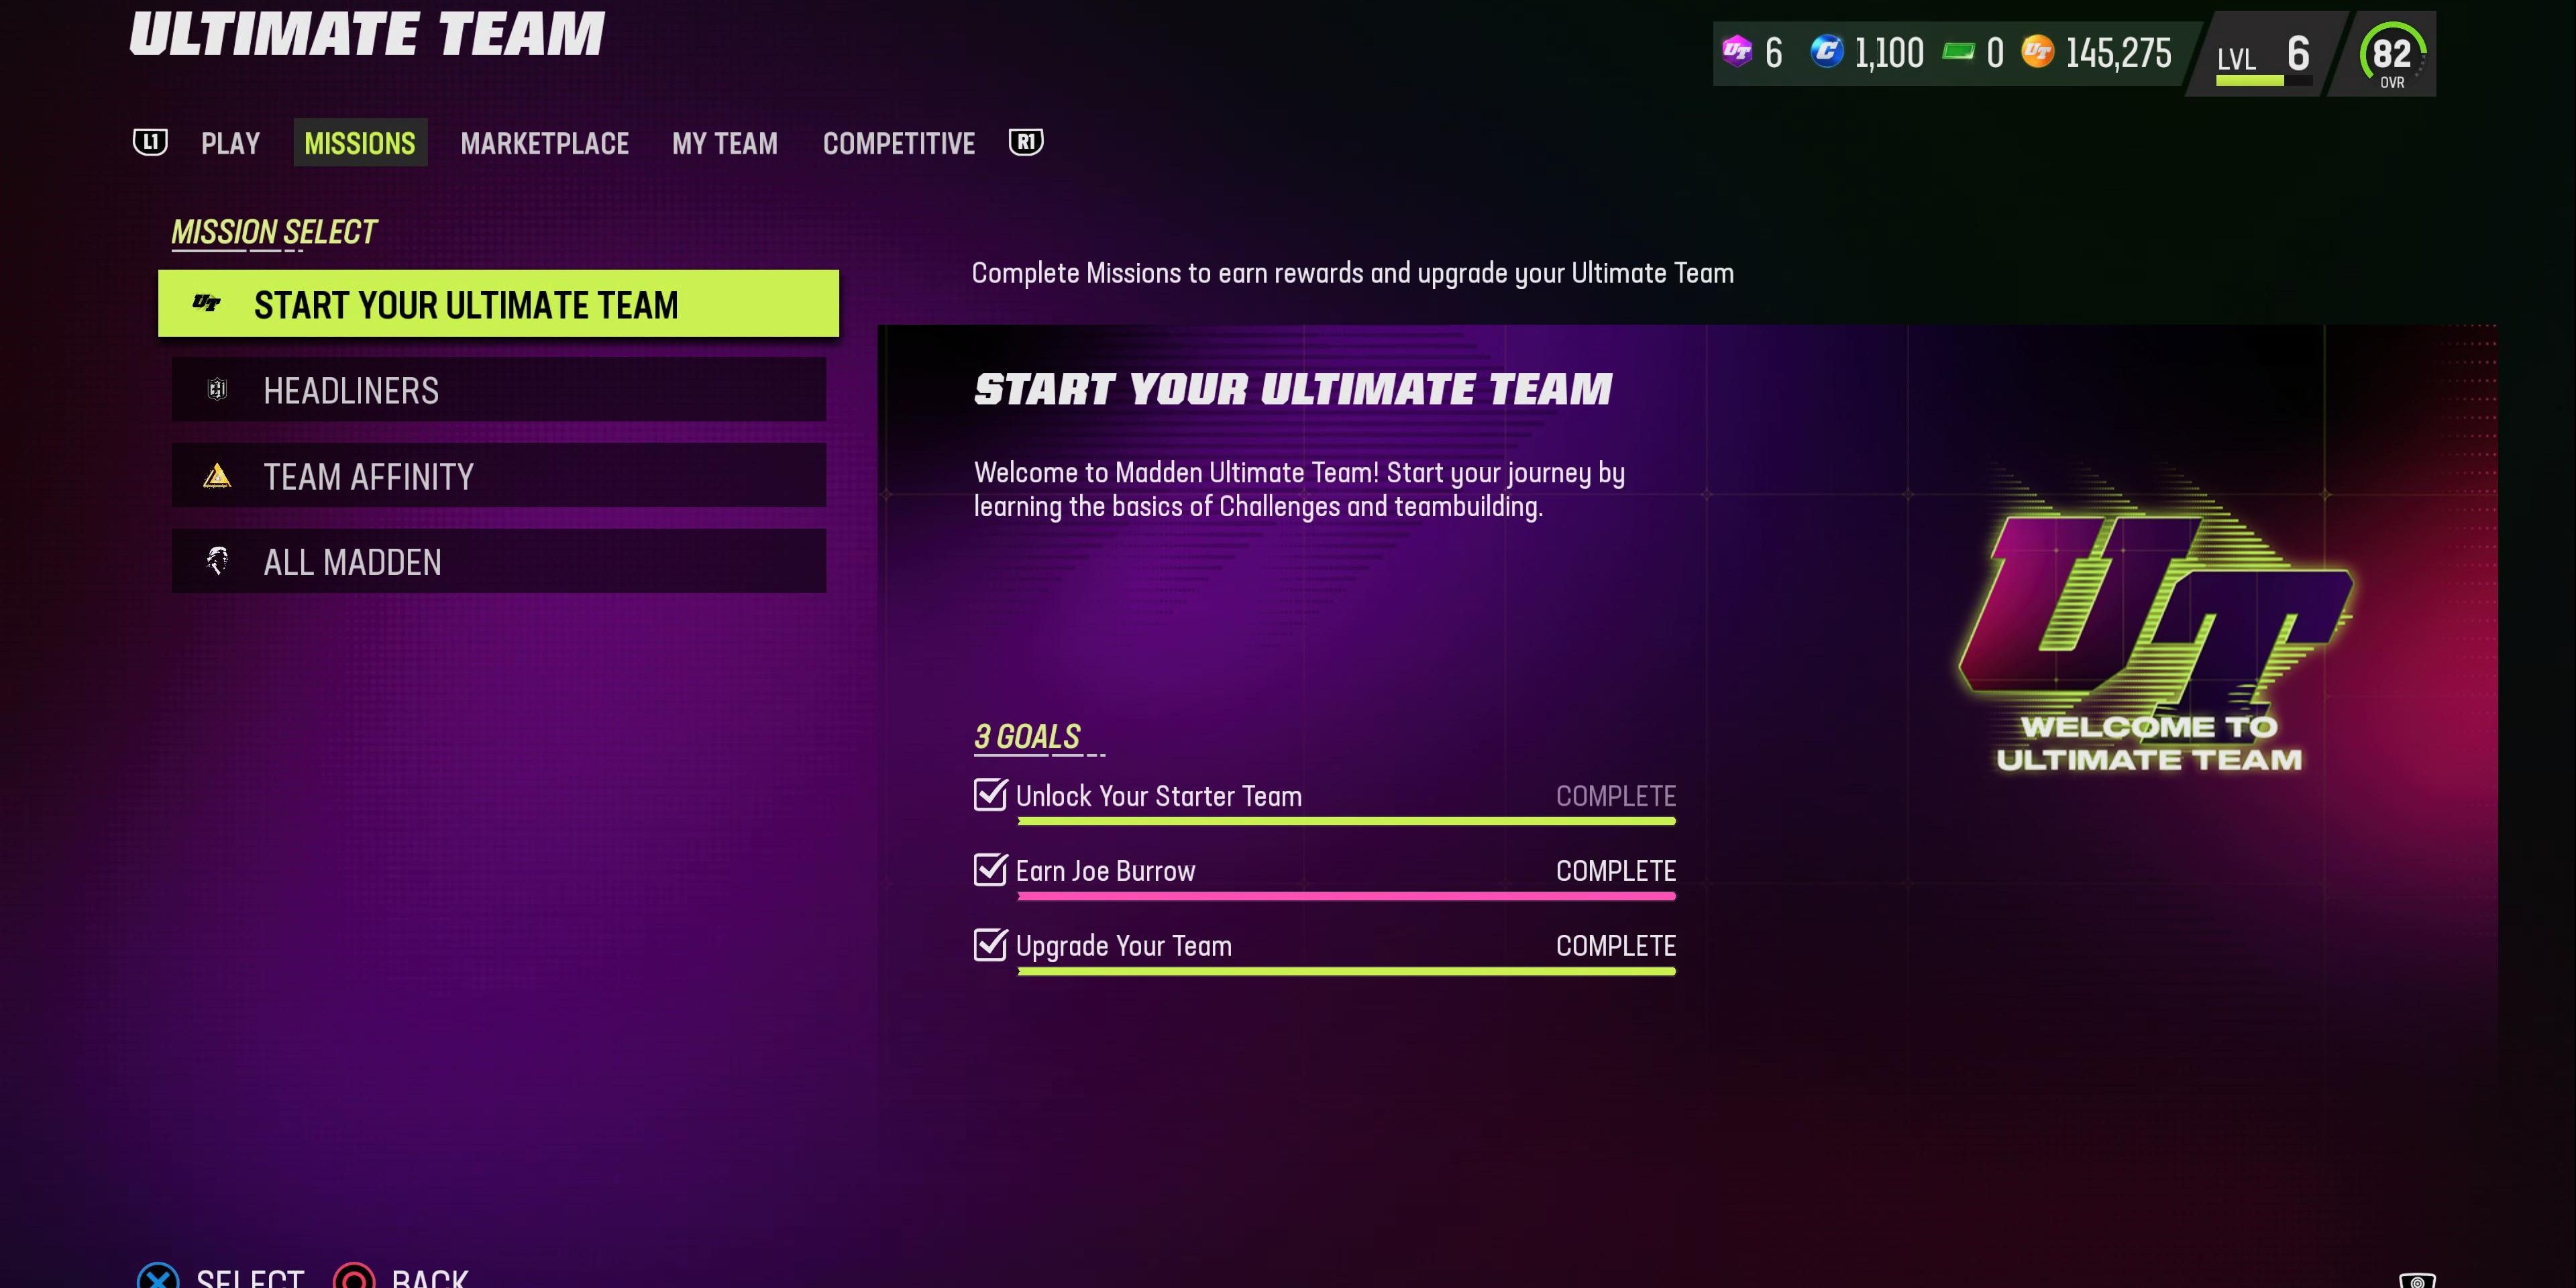 select missions to earn rewards in ultimate team